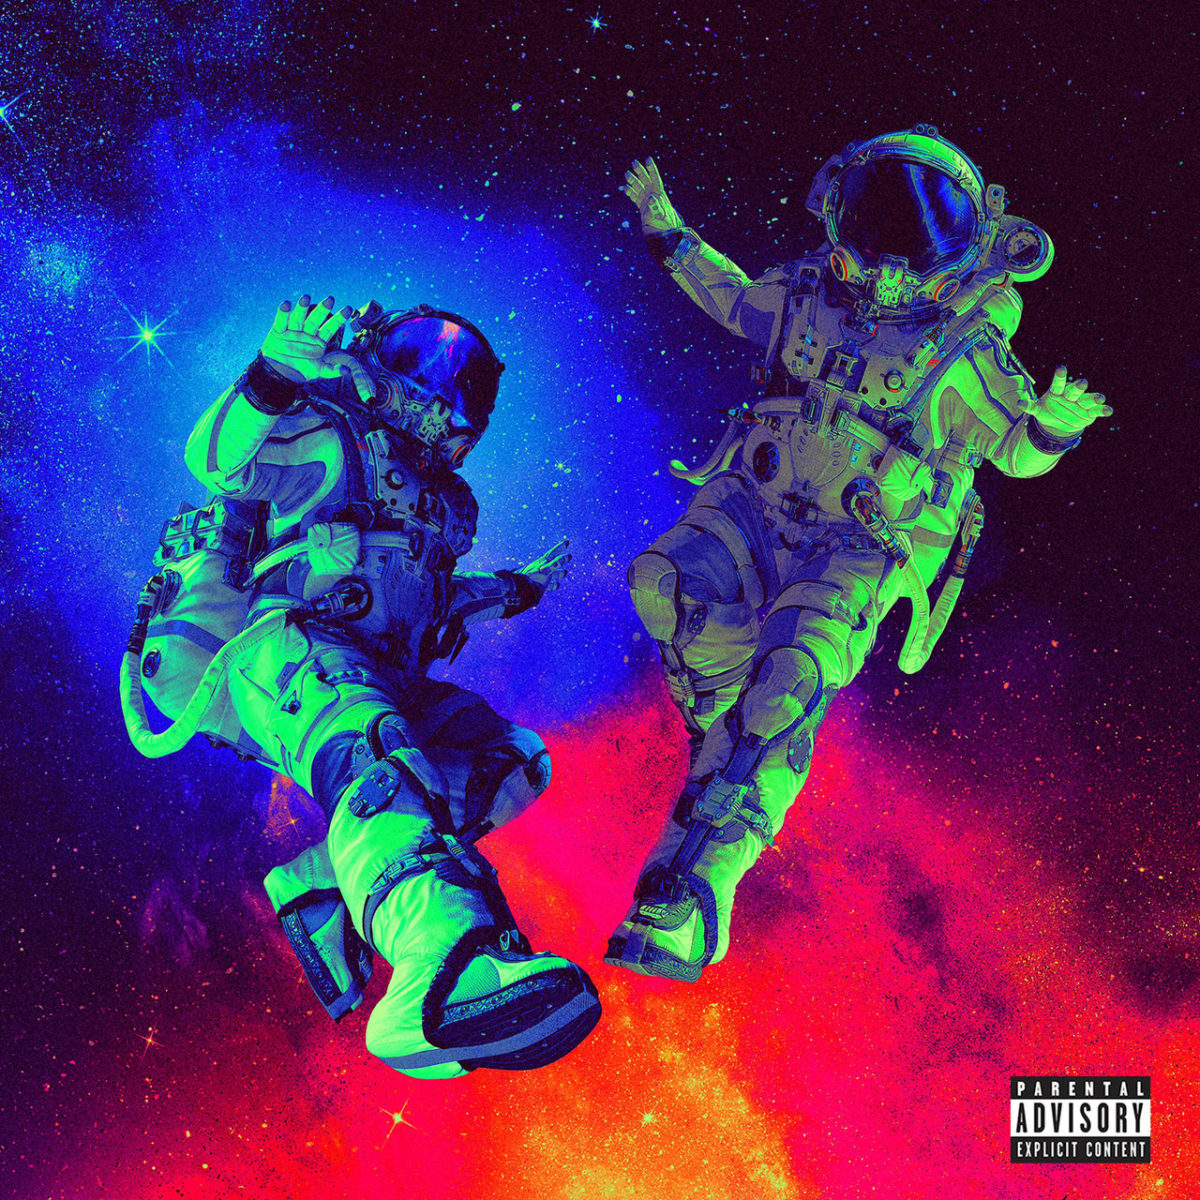 Future and Lil Uzi Vert - Pluto and Baby Pluto (Deluxe) (Cover)